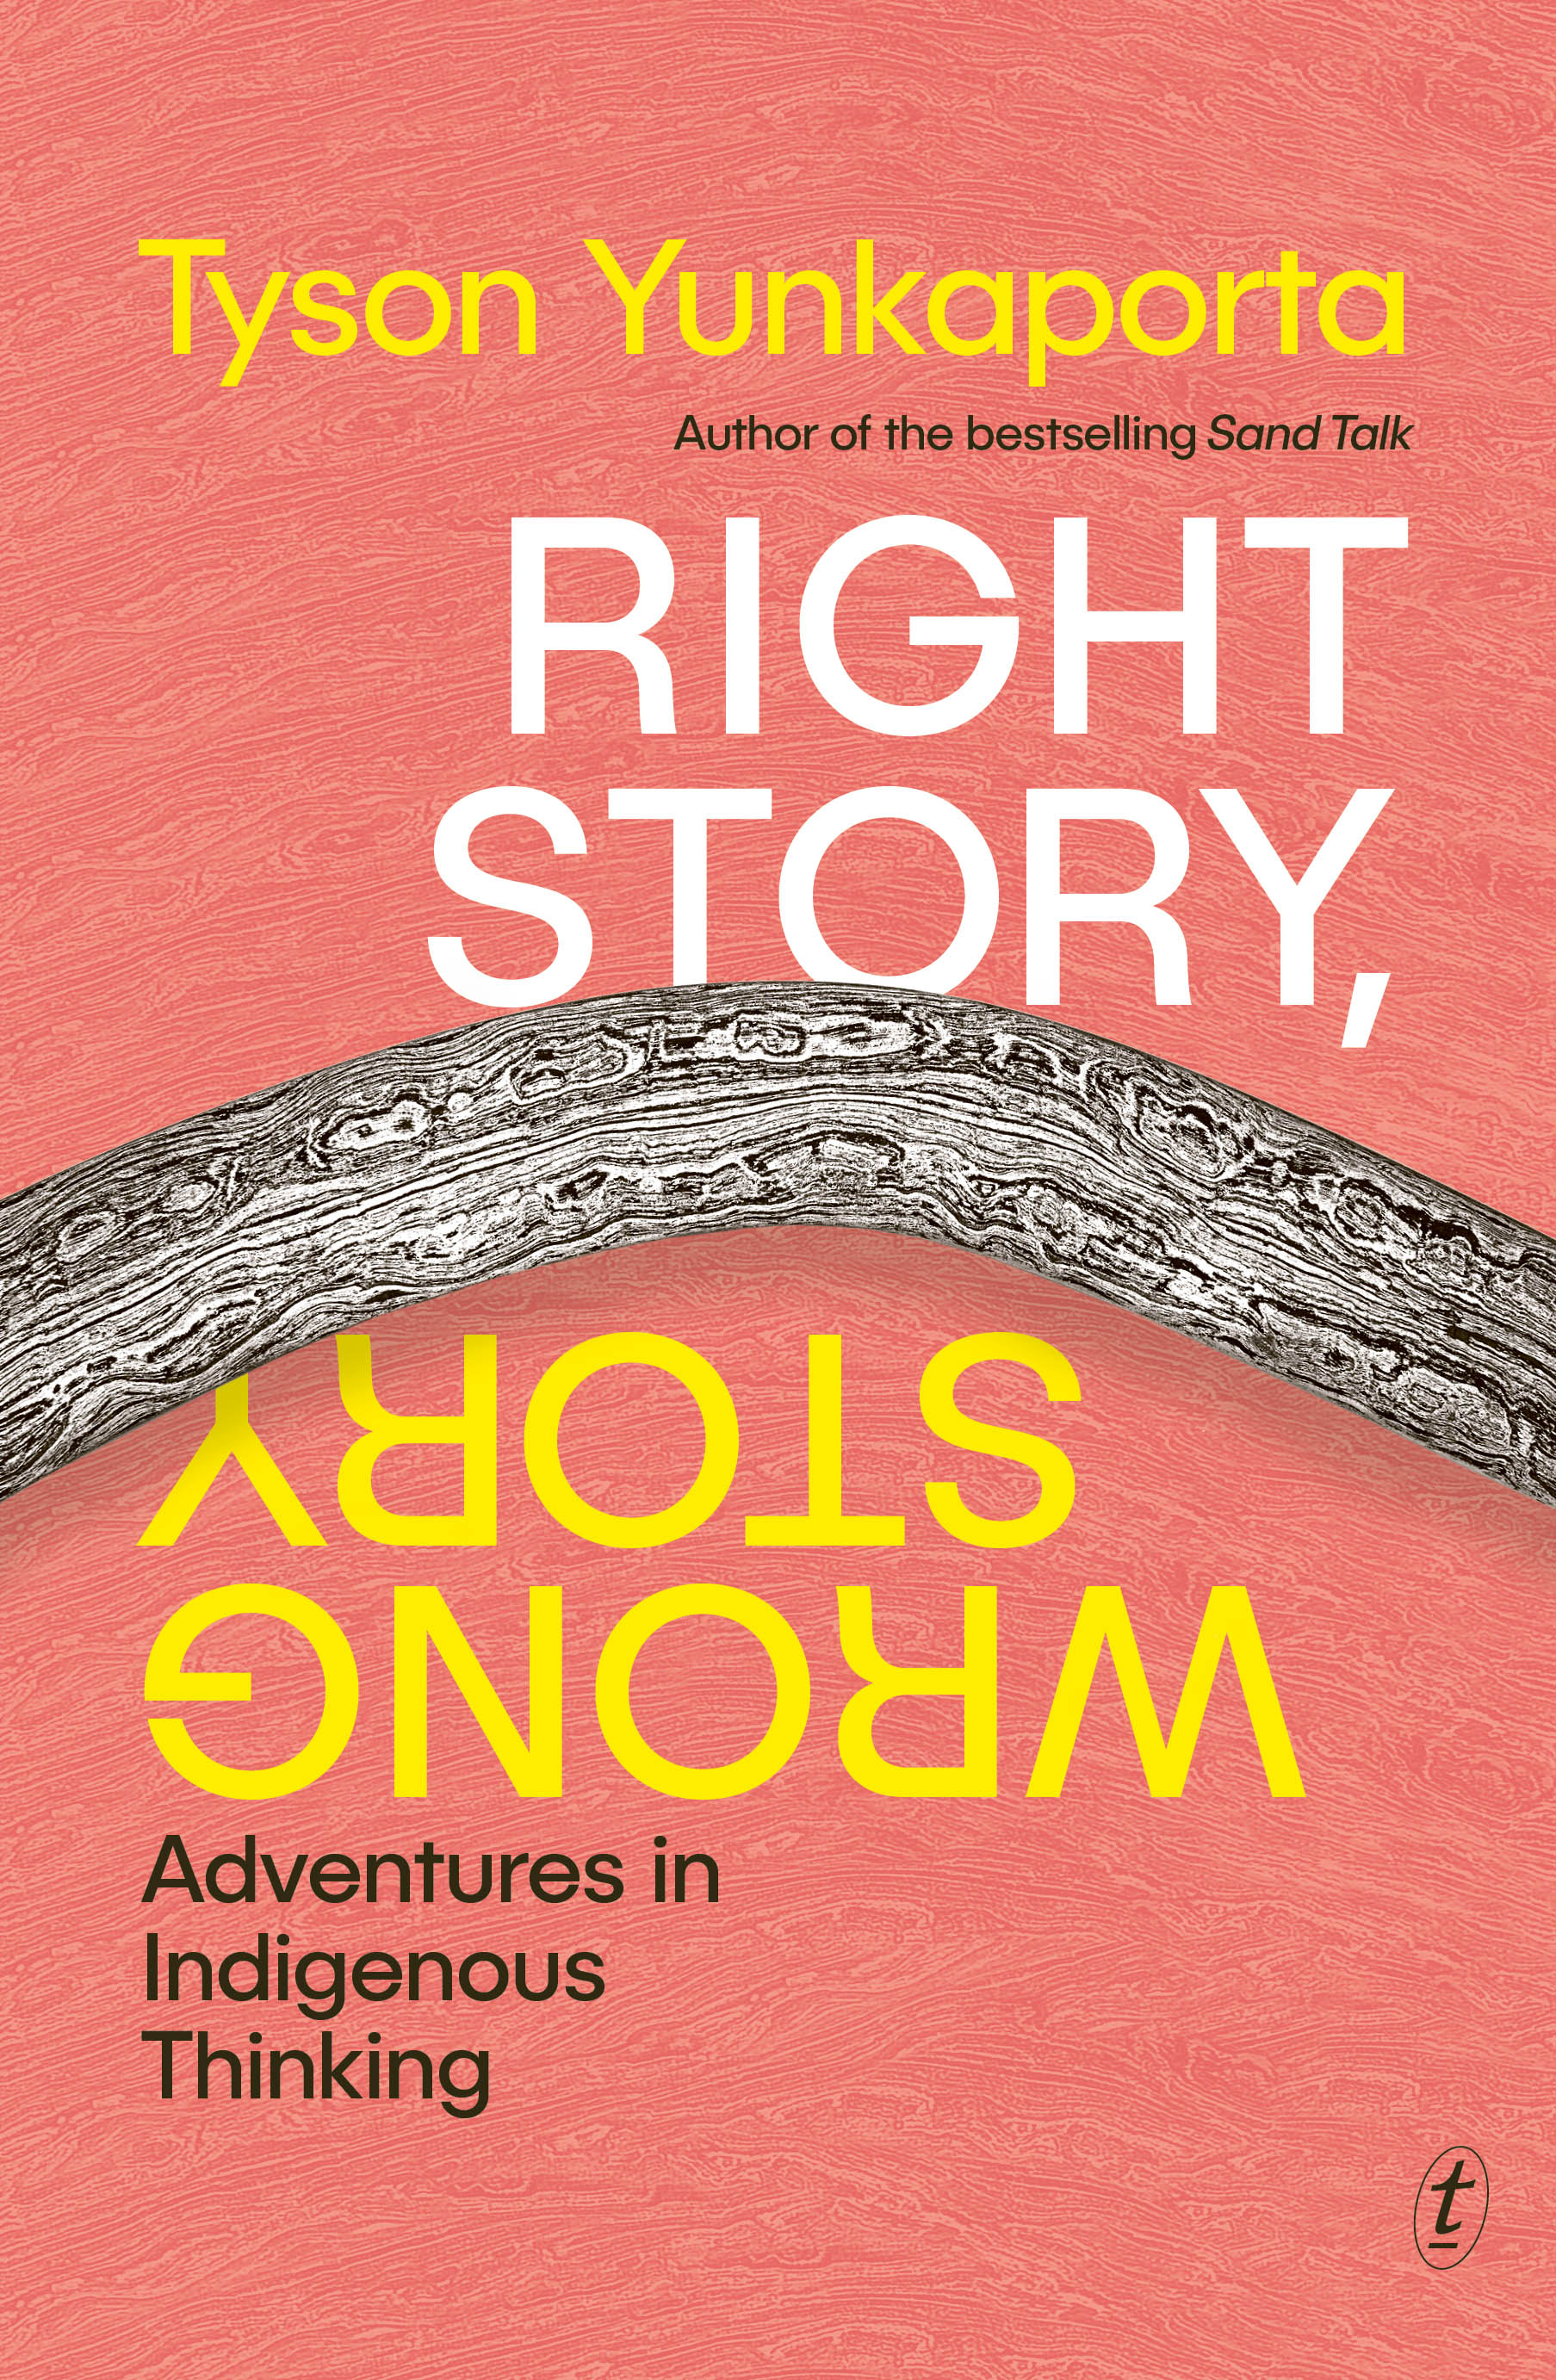 Right Story Wrong Story: Adventures in Indigenous Thinking by Tyson Yunkaporta